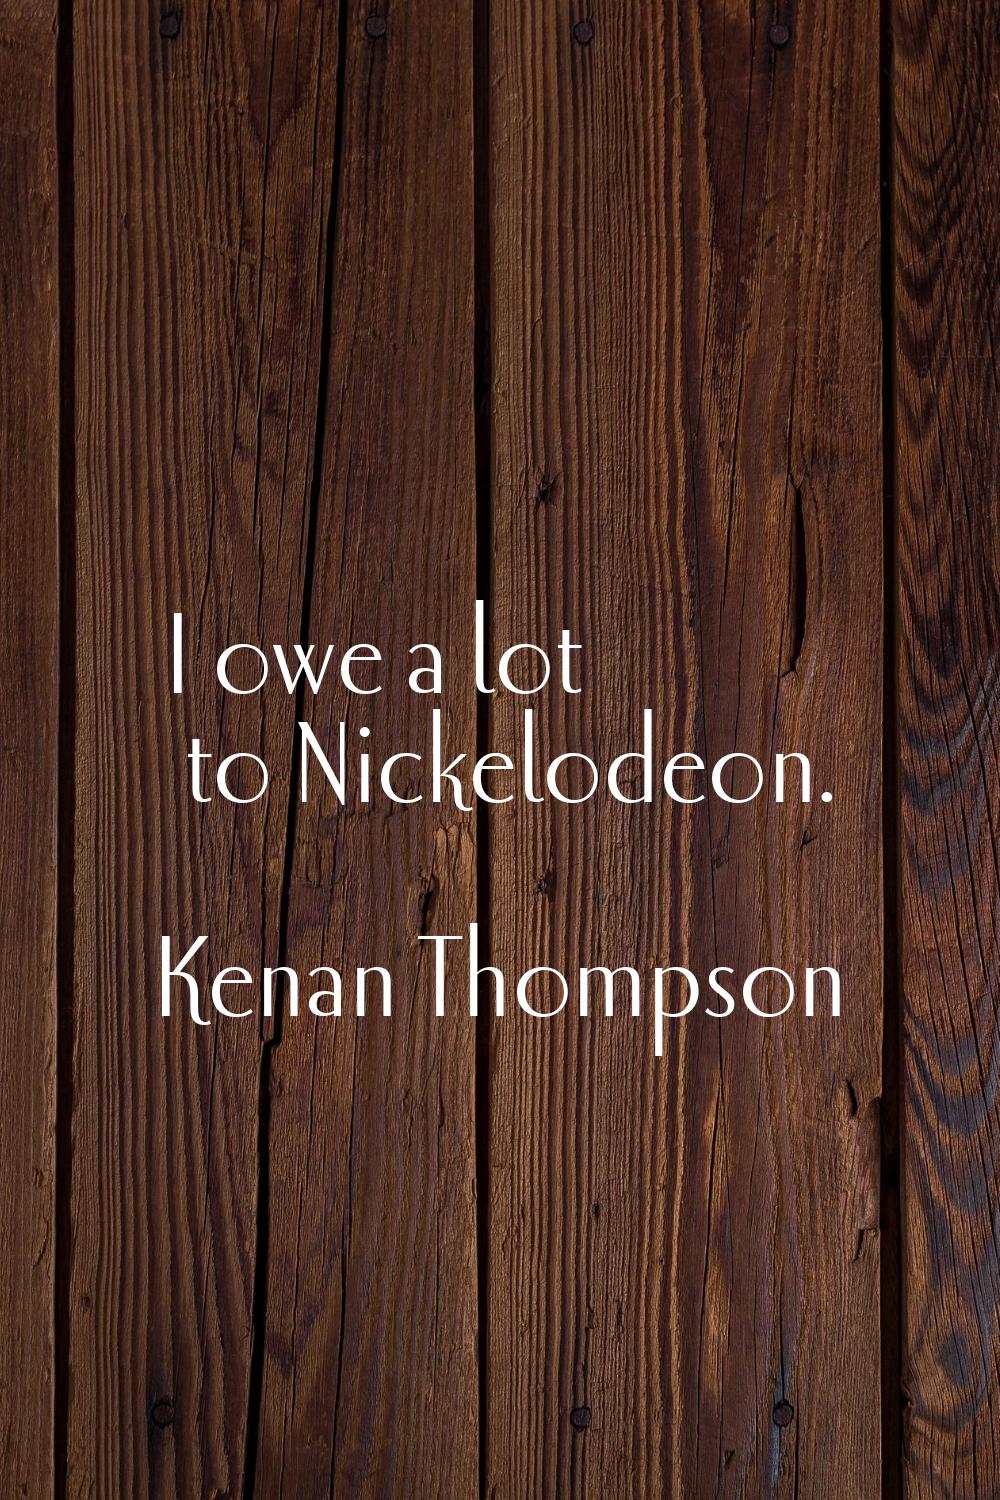 I owe a lot to Nickelodeon.